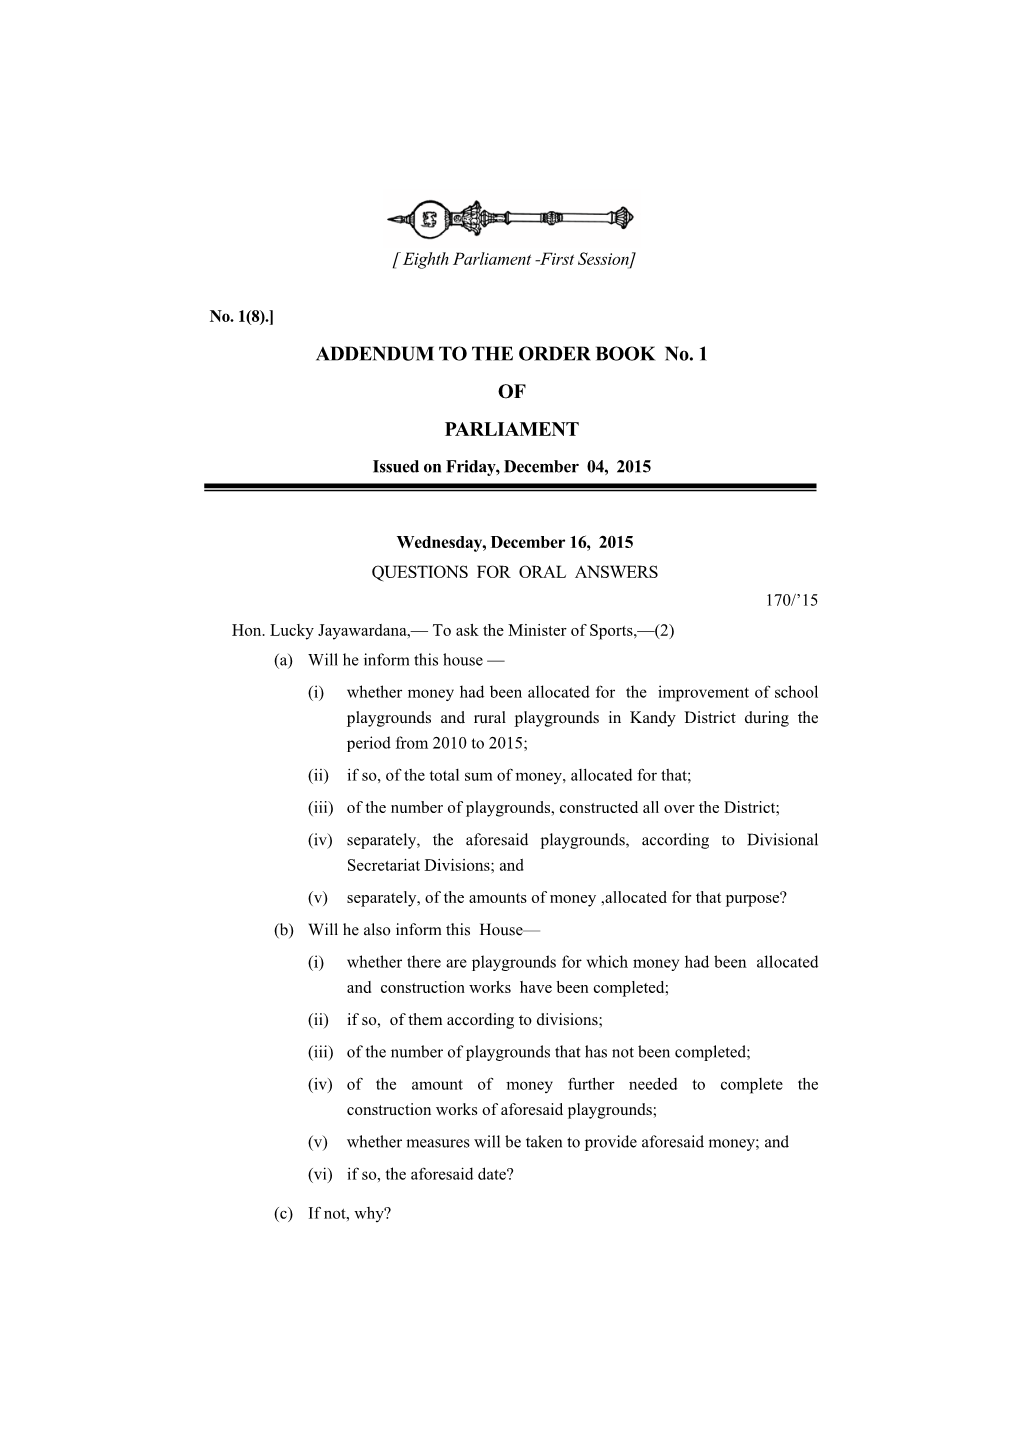 ADDENDUM to the ORDER BOOK No. 1 of PARLIAMENT Issued on Friday, December 04, 2015